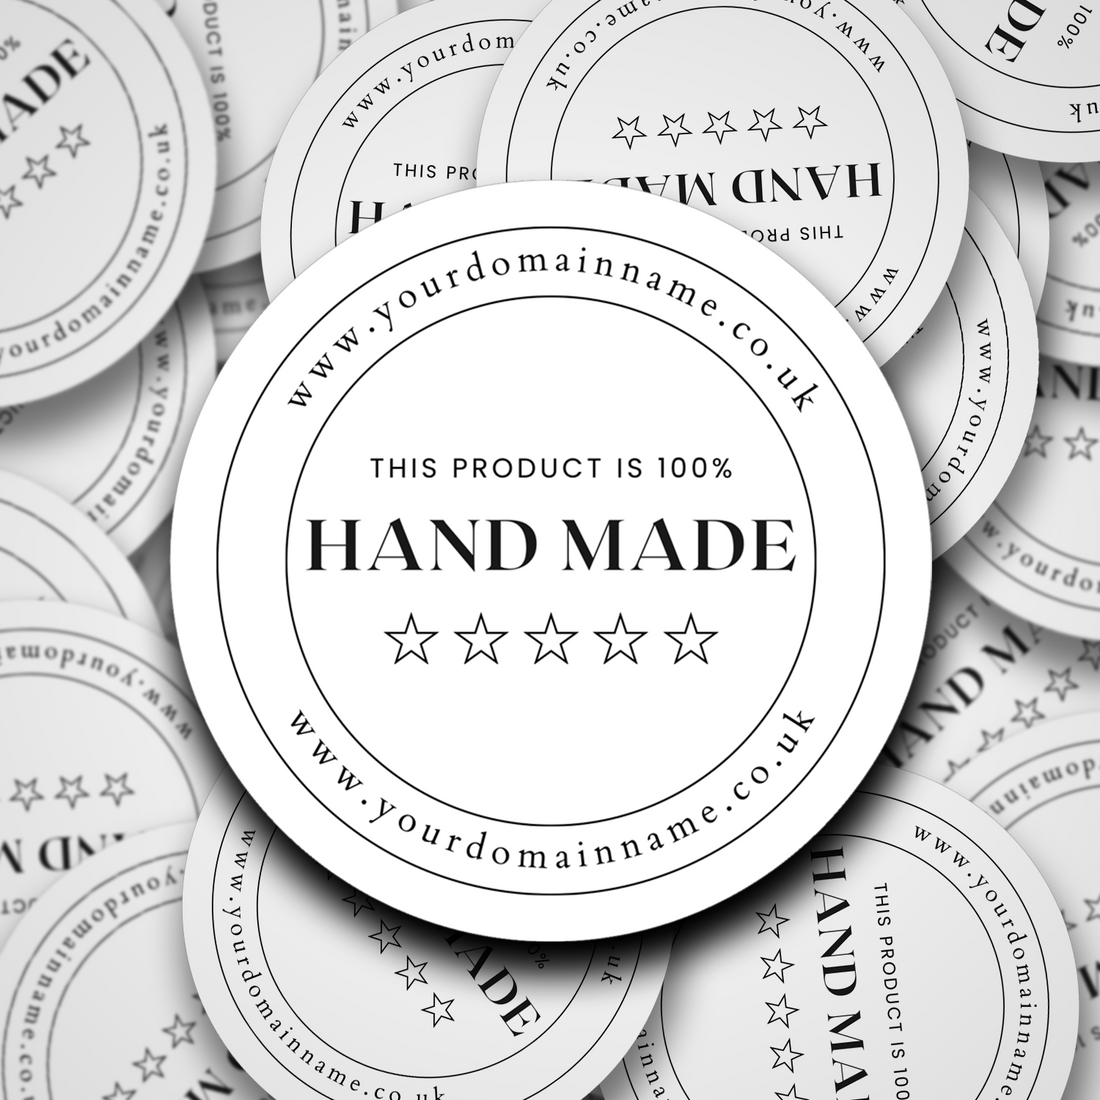 Personalised 100% Hand Made product stickers - Printed on Clear Vinyl